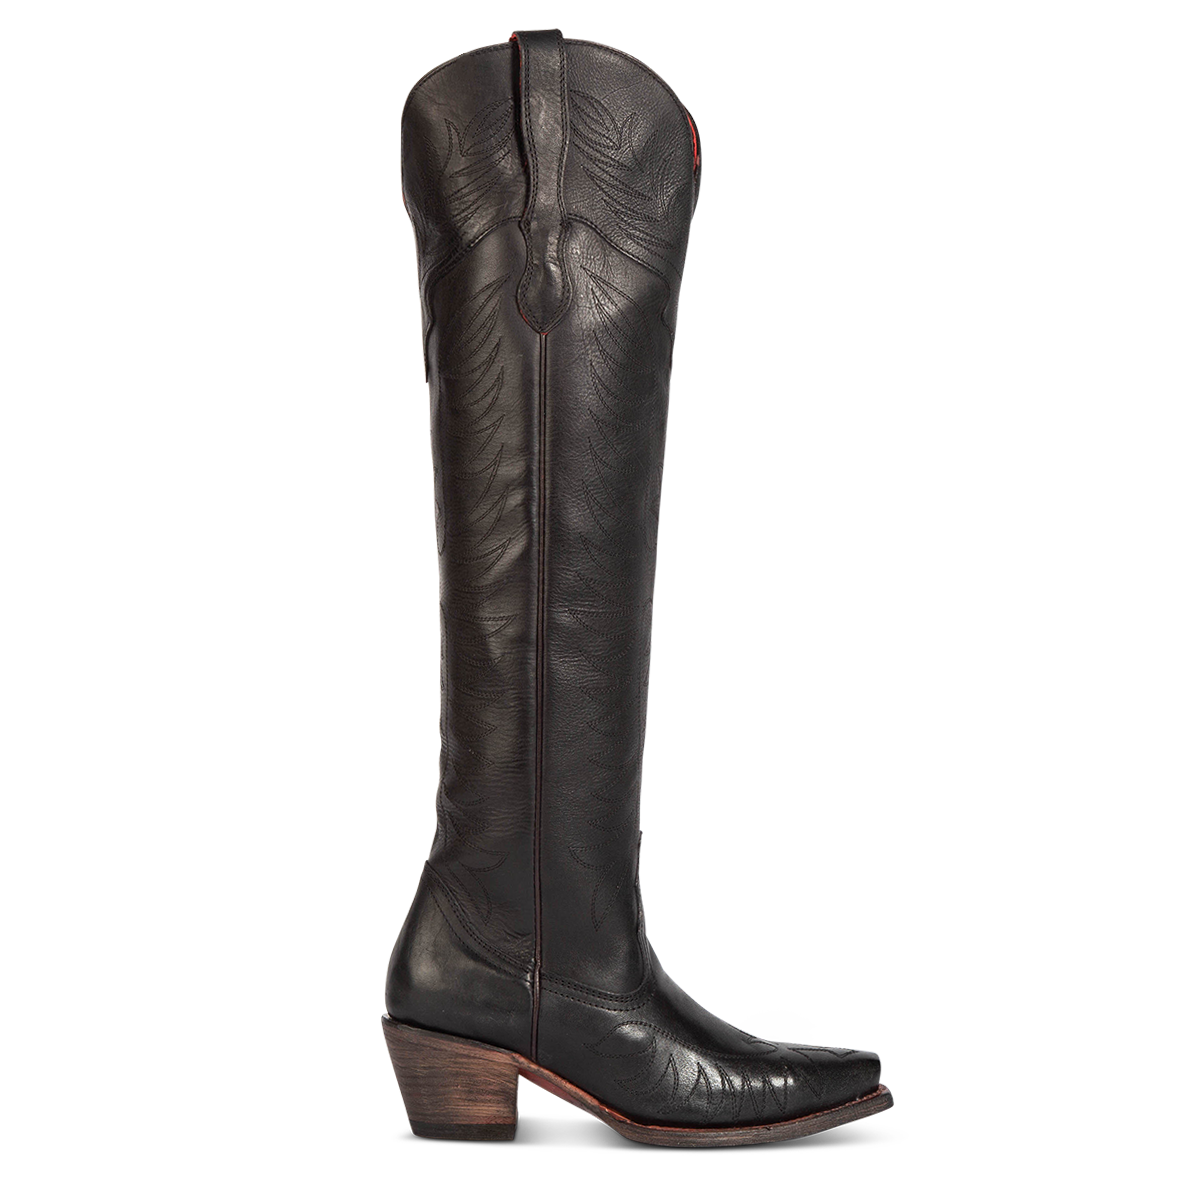 FREEBIRD women's Misty black leather tall boot with western stitch detailing and traditional snip toe construction